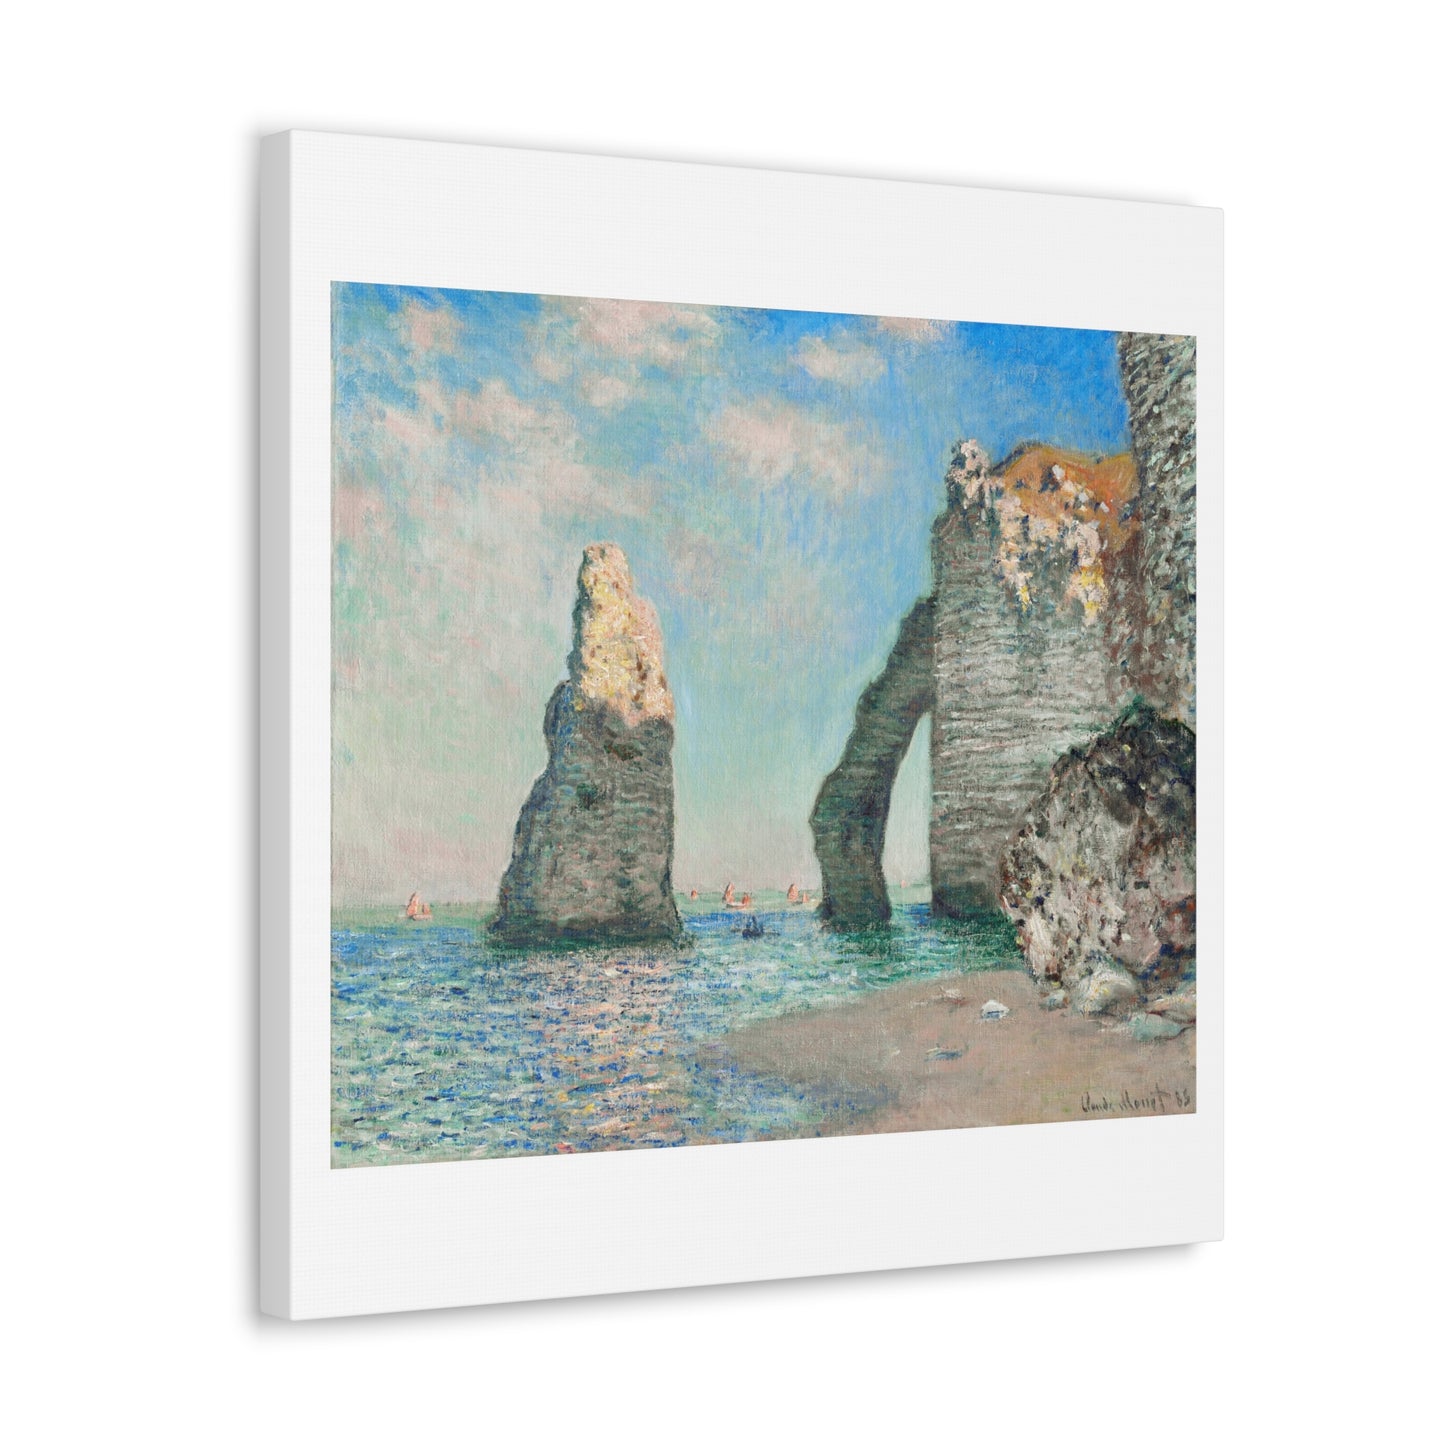 The Cliffs at Étretat (1885) by Claude Monet, from the Original, Art Print on Canvas